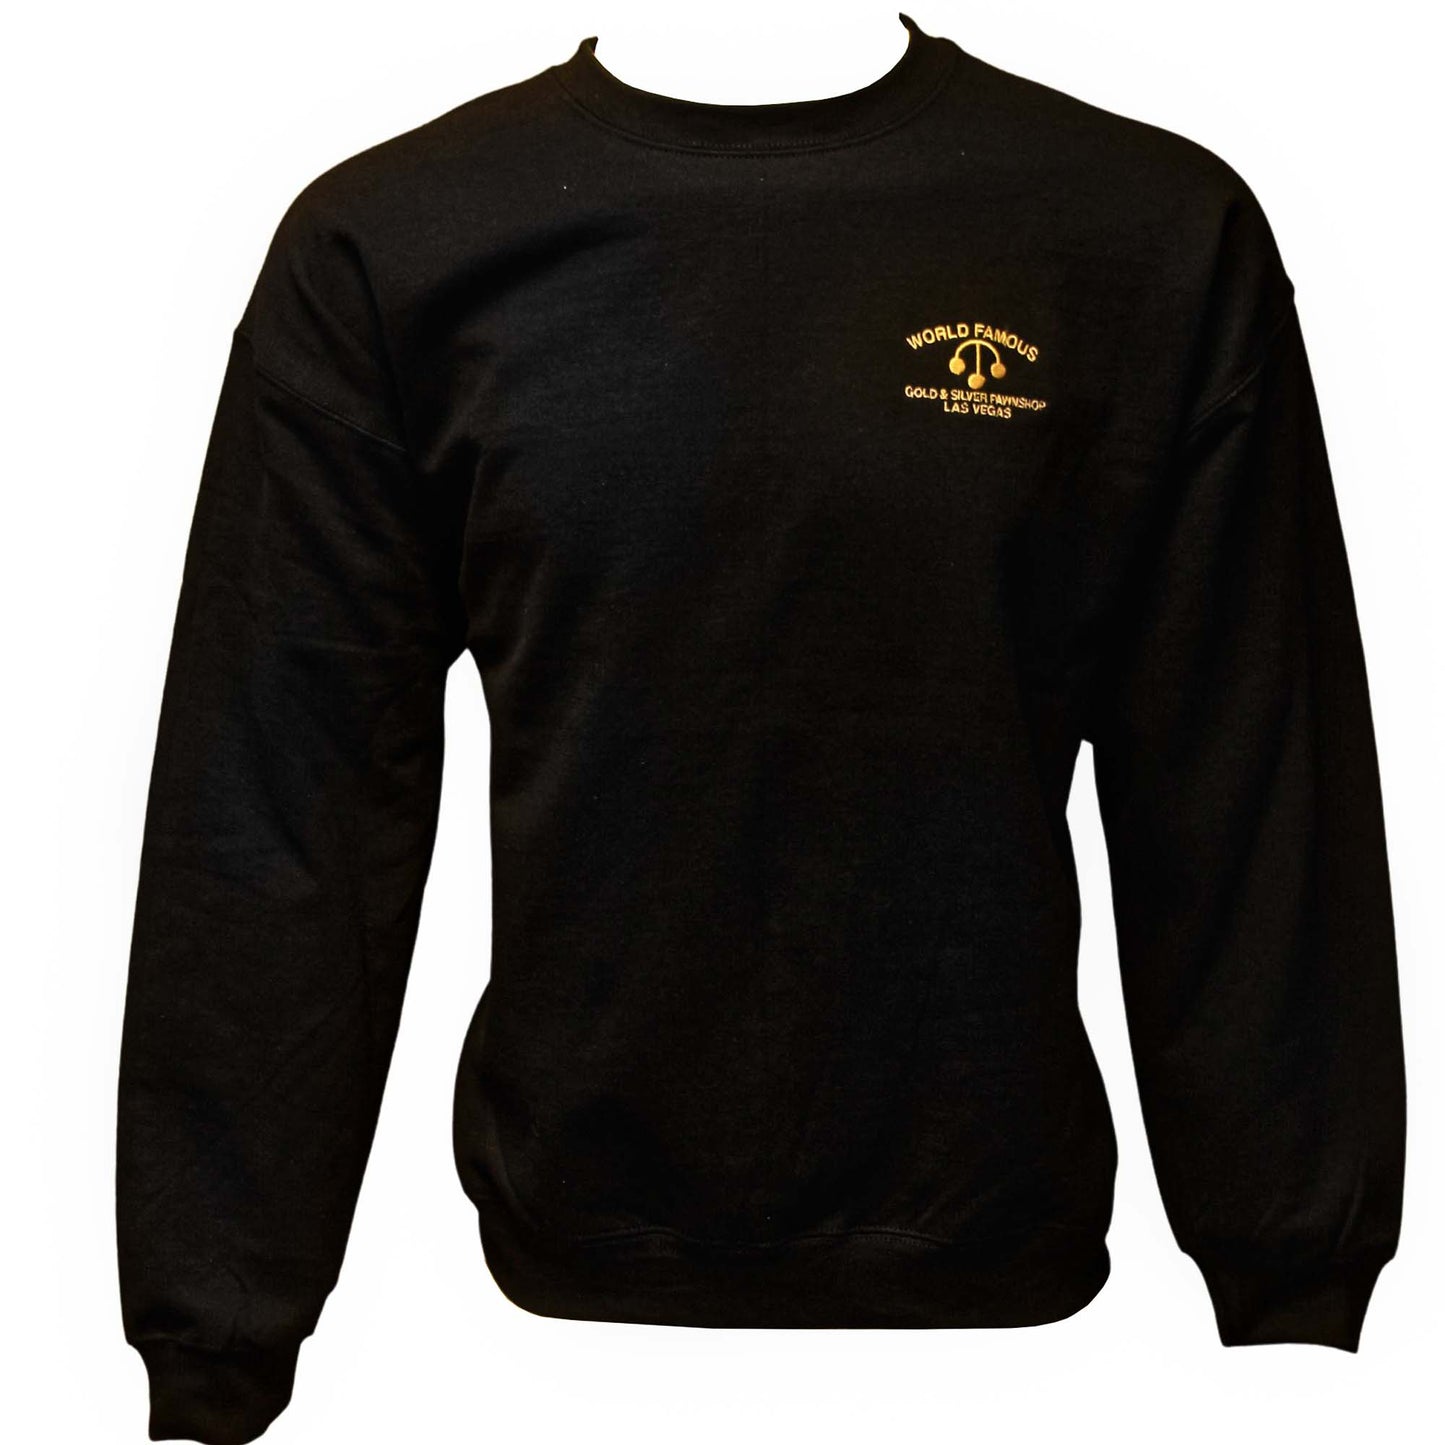 The World Famous Gold & Silver Pawn Shop Long Sleeve Sweatshirt ZOOM